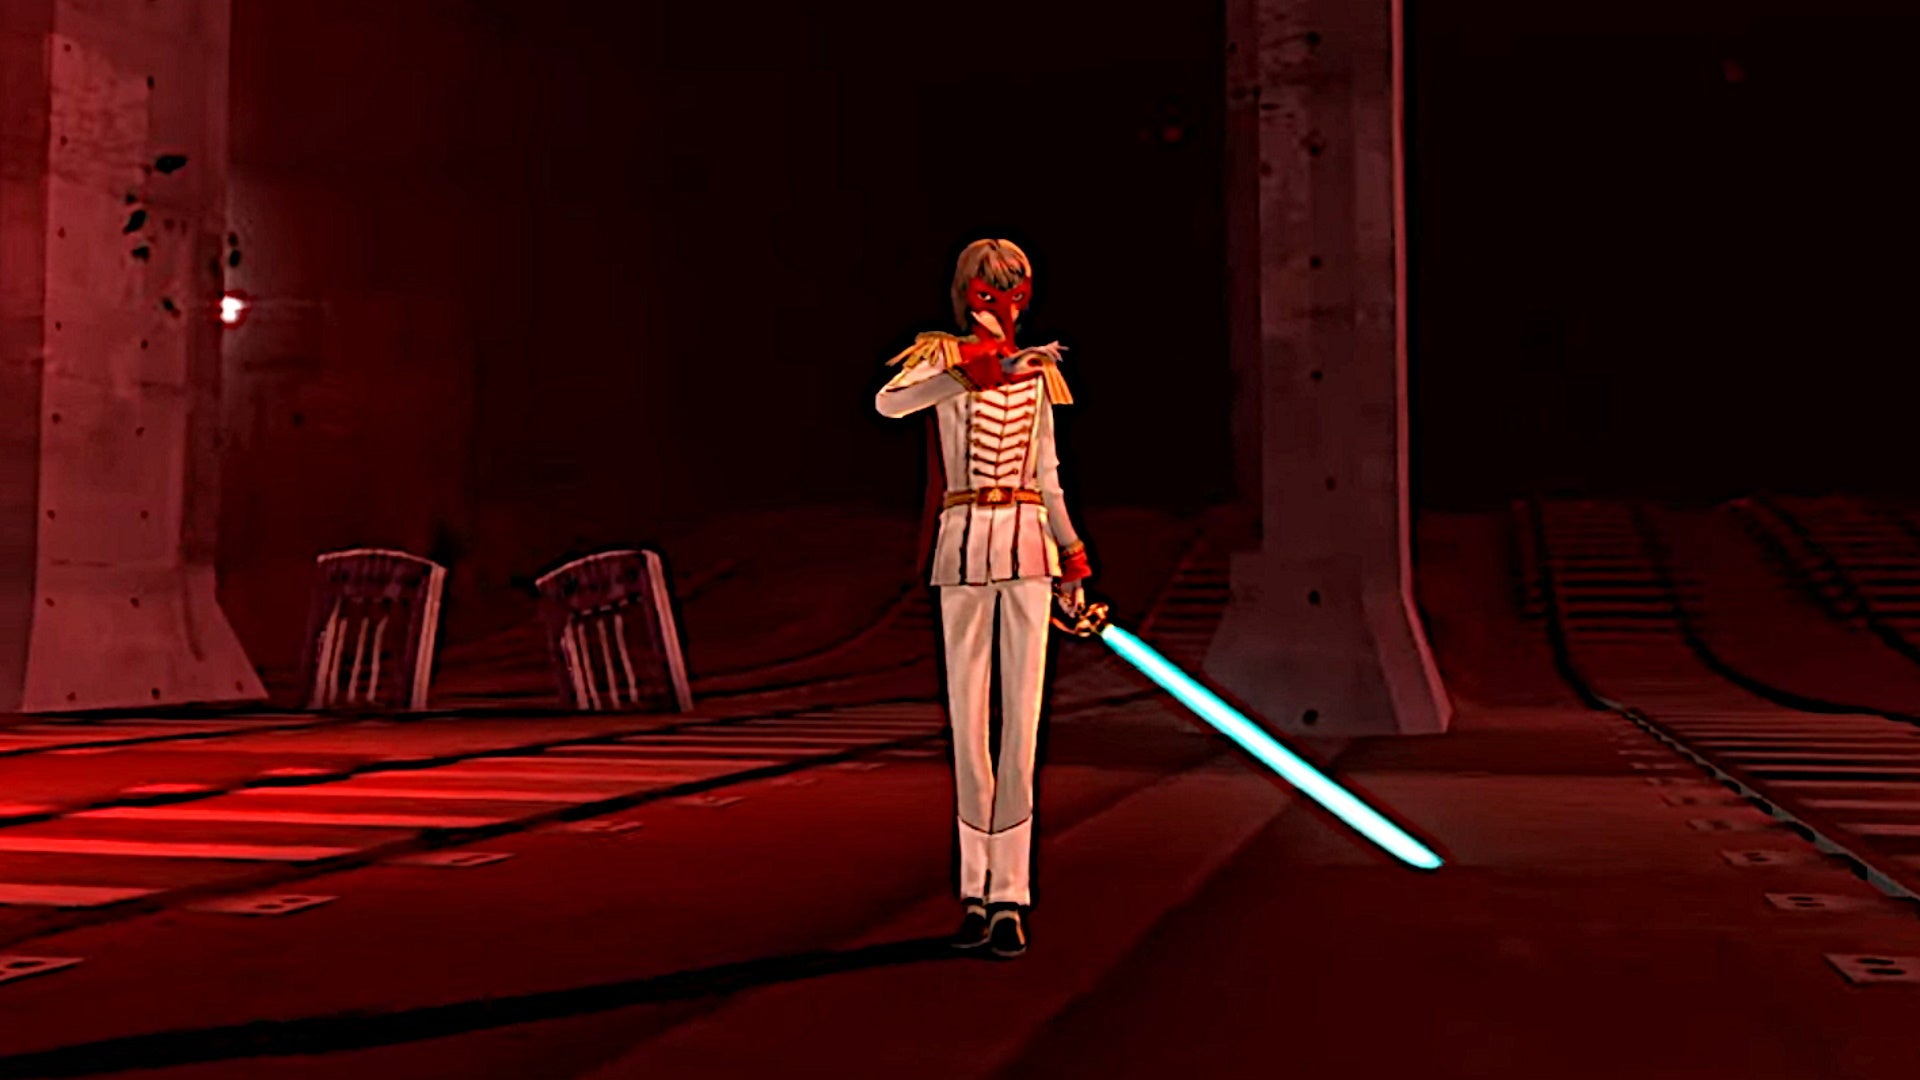 Persona 5 Royal Akechi Confidant: An anime young man wearing a white suit and red mask brandishes a sword